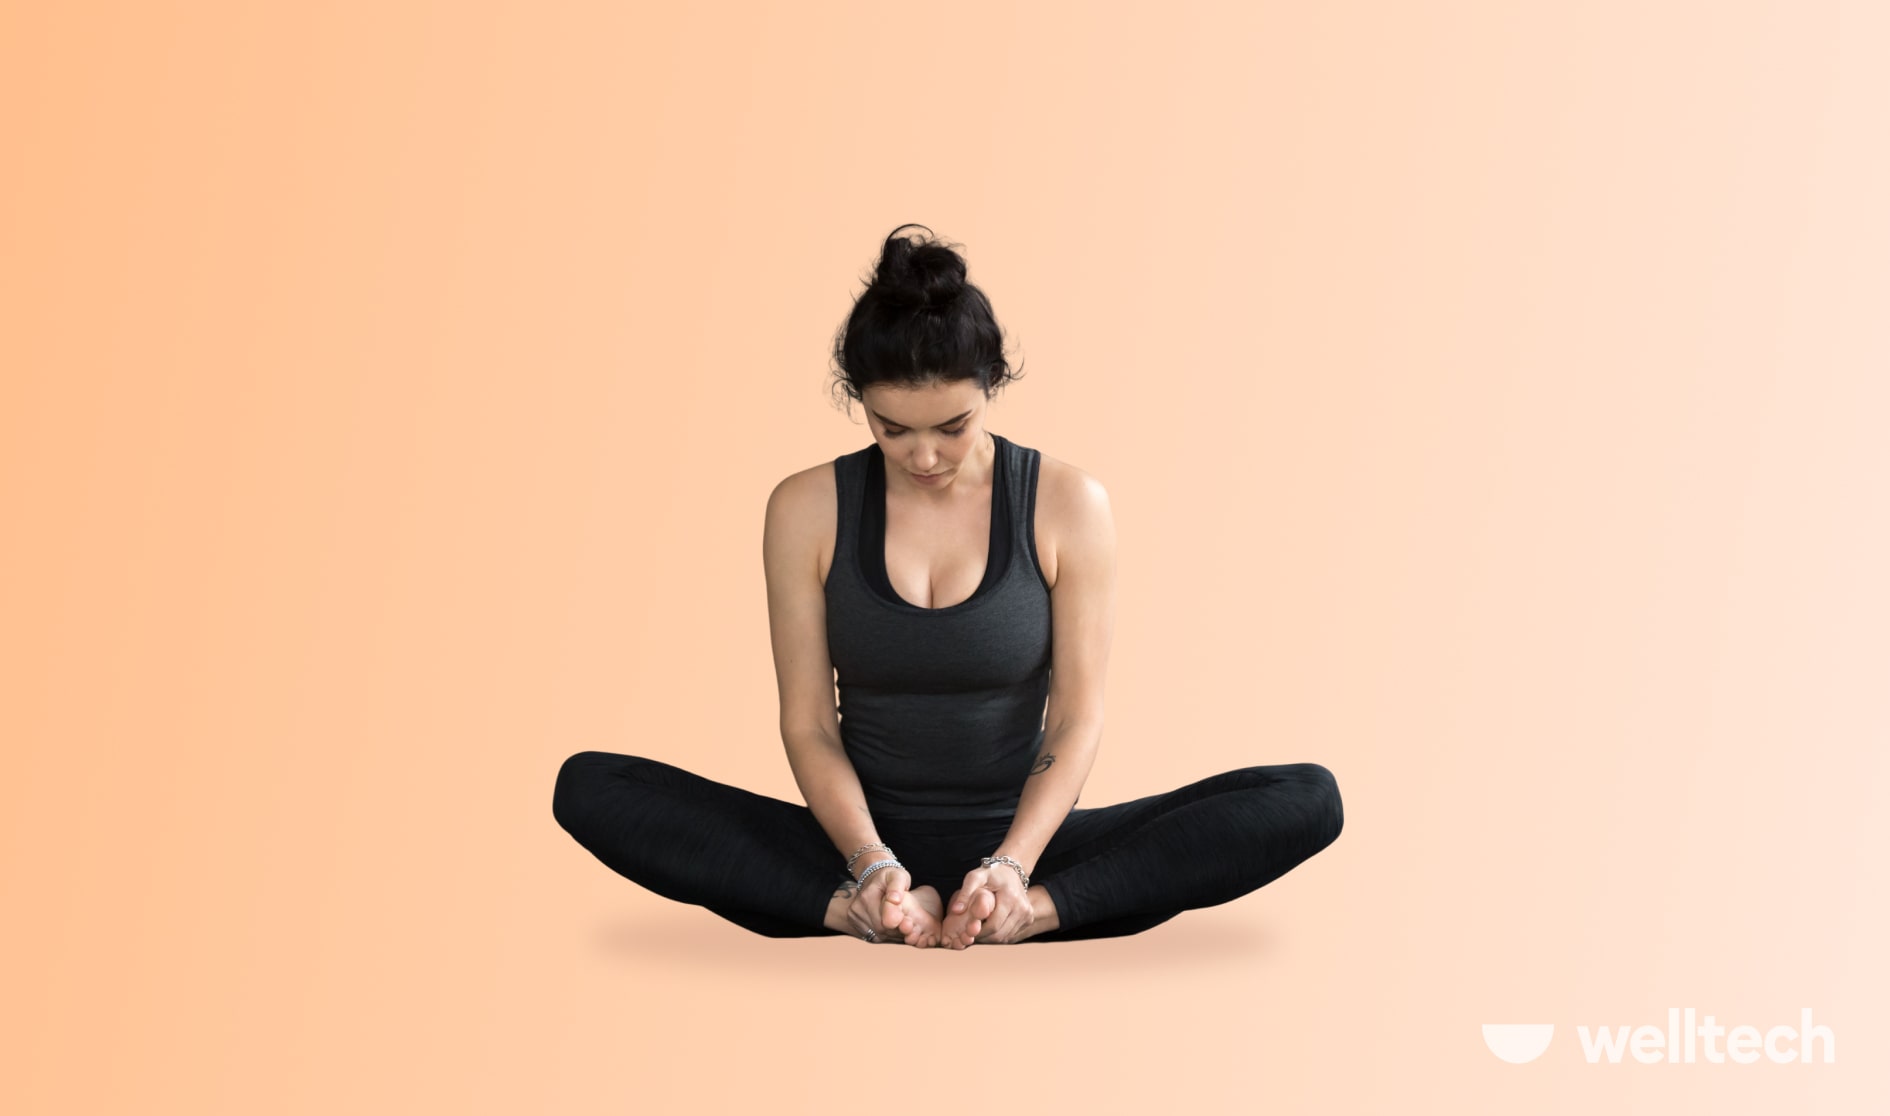 Foot yoga: 8 Best Yoga Feet & Toe Stretches to Do Every Day